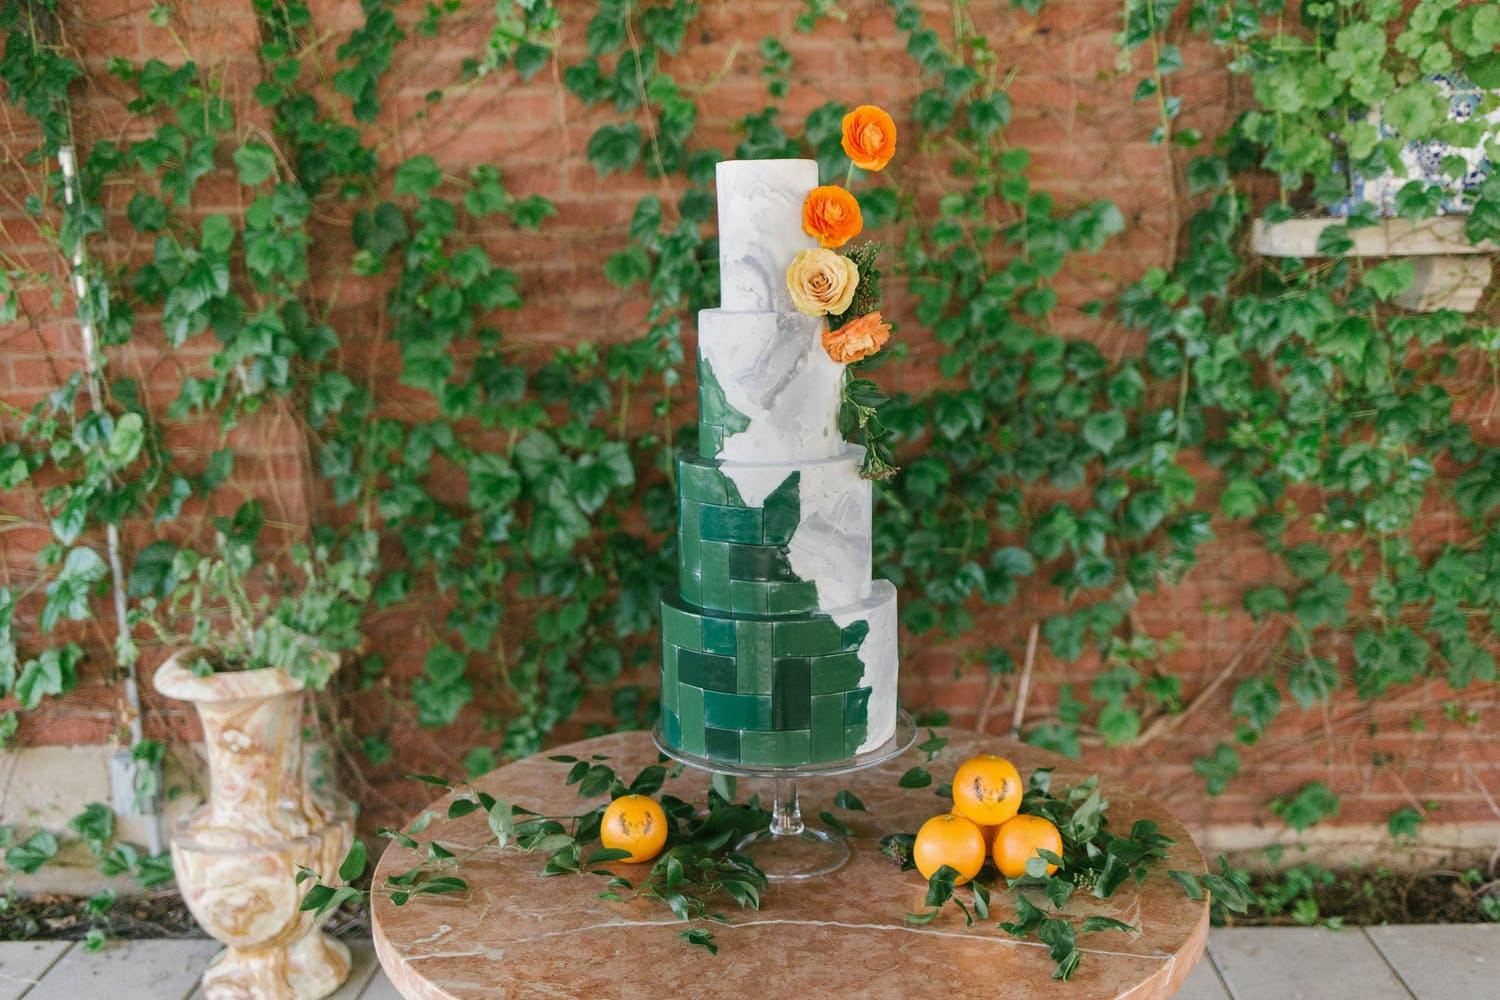 Four-tier circular wedding cake with mix of green tile designs and grey marble | PartySlate